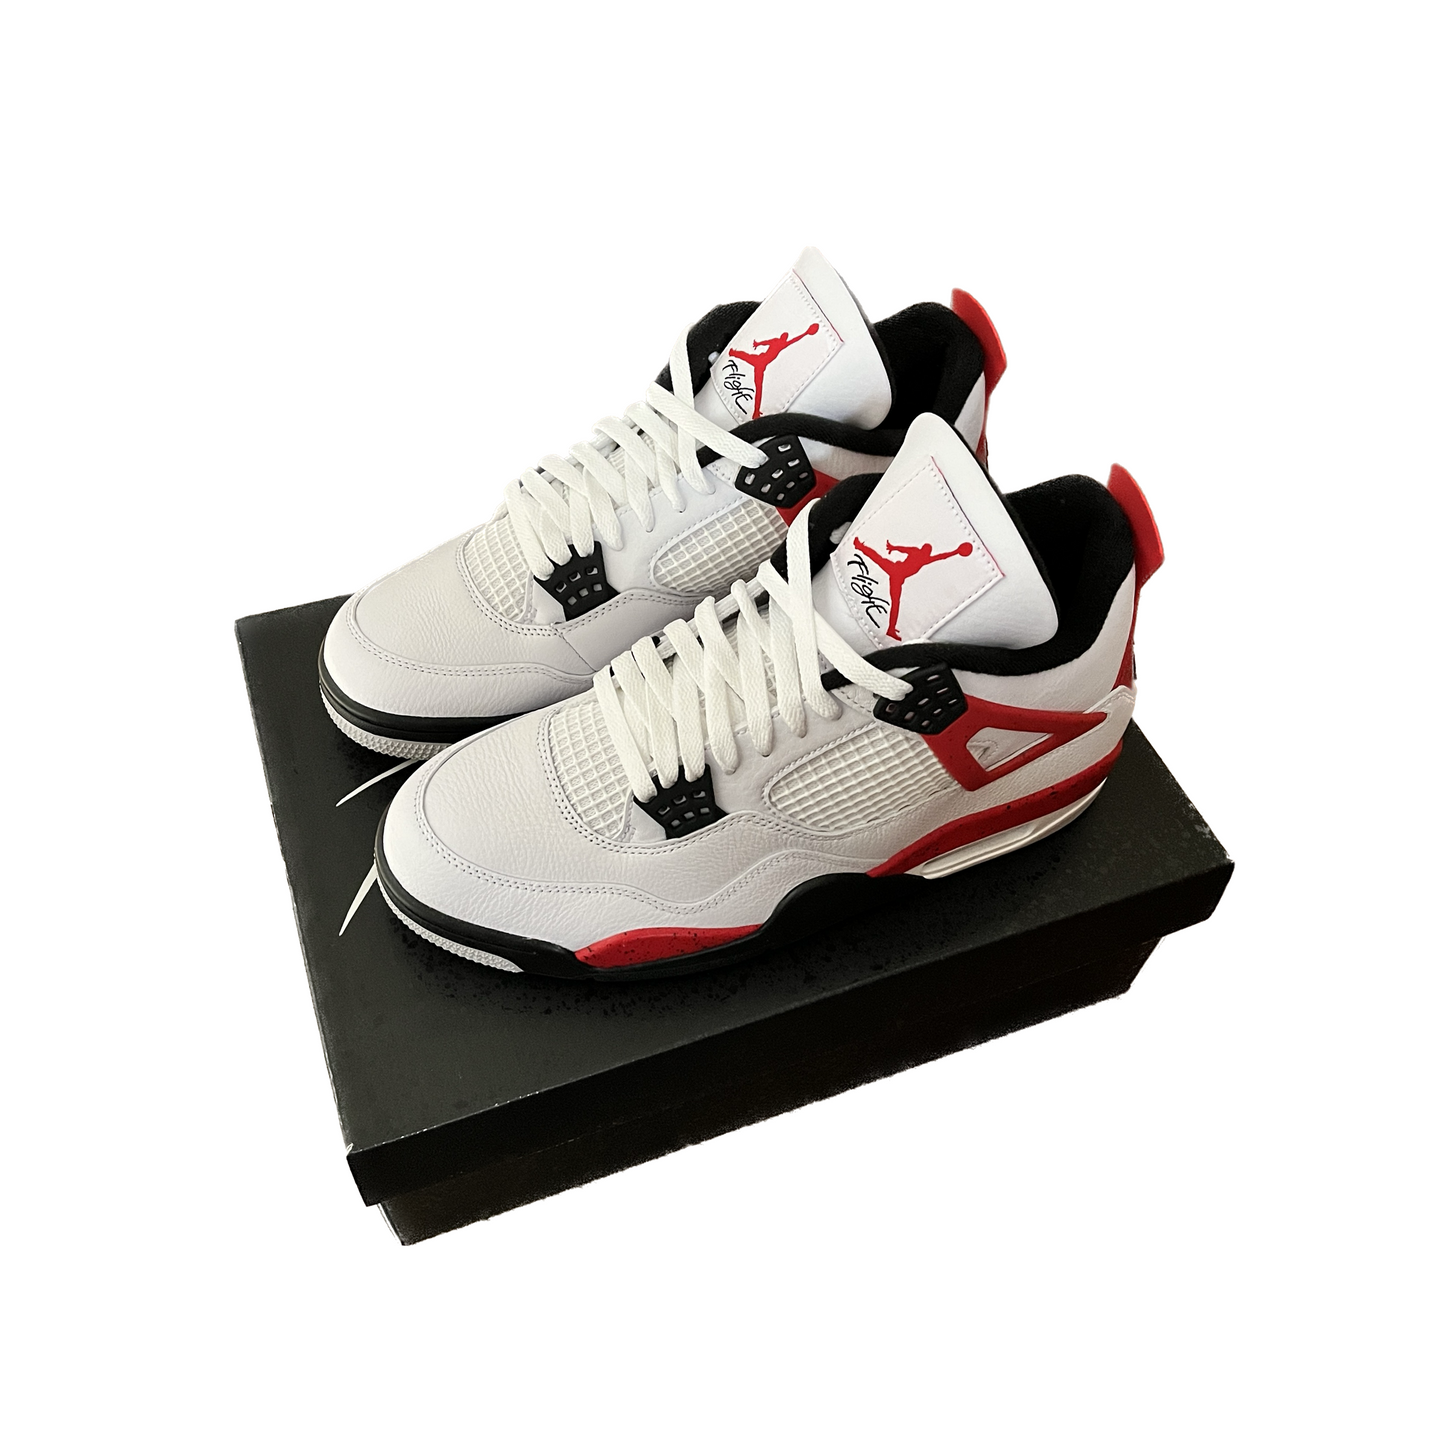 Jordan 4 Red Cement - The Global Hype